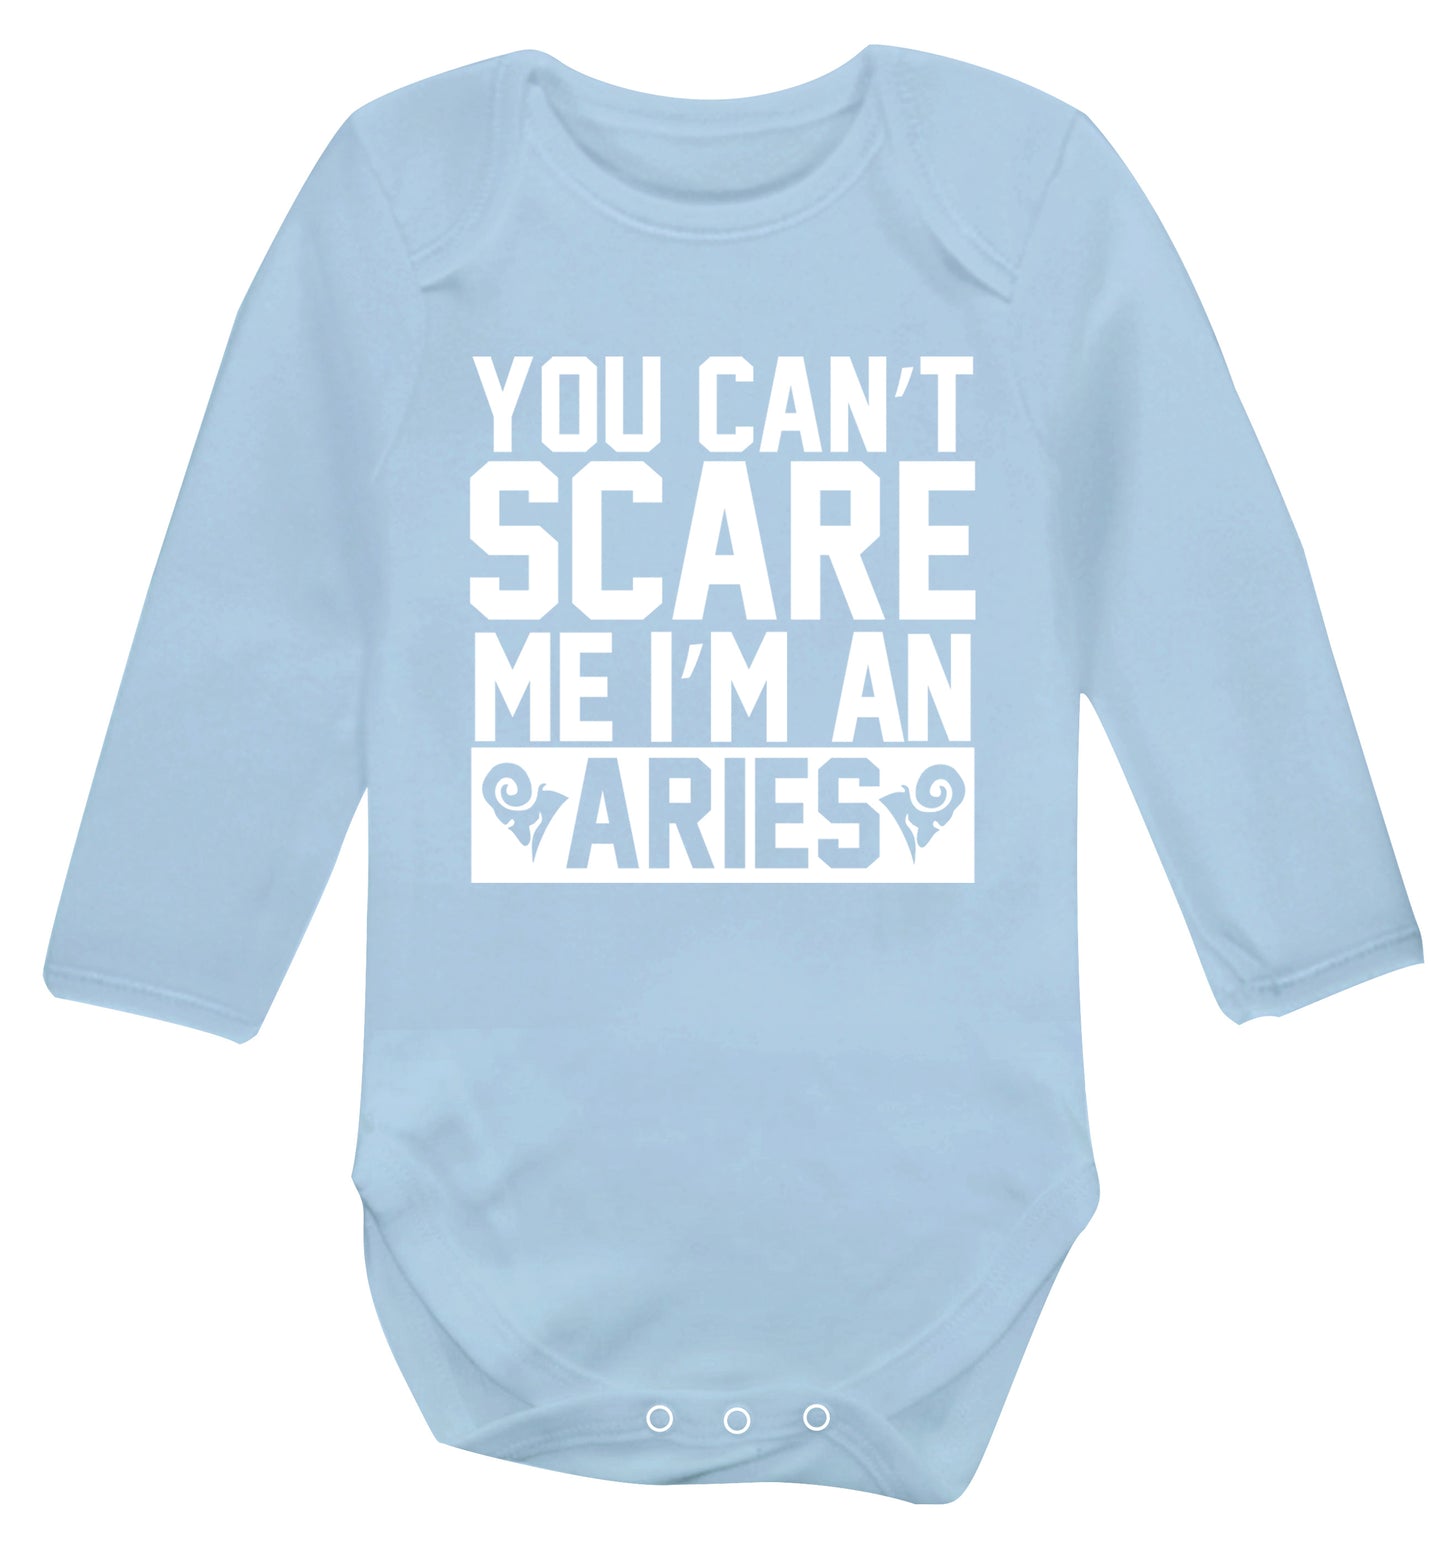 You can't scare me I'm an aries Baby Vest long sleeved pale blue 6-12 months